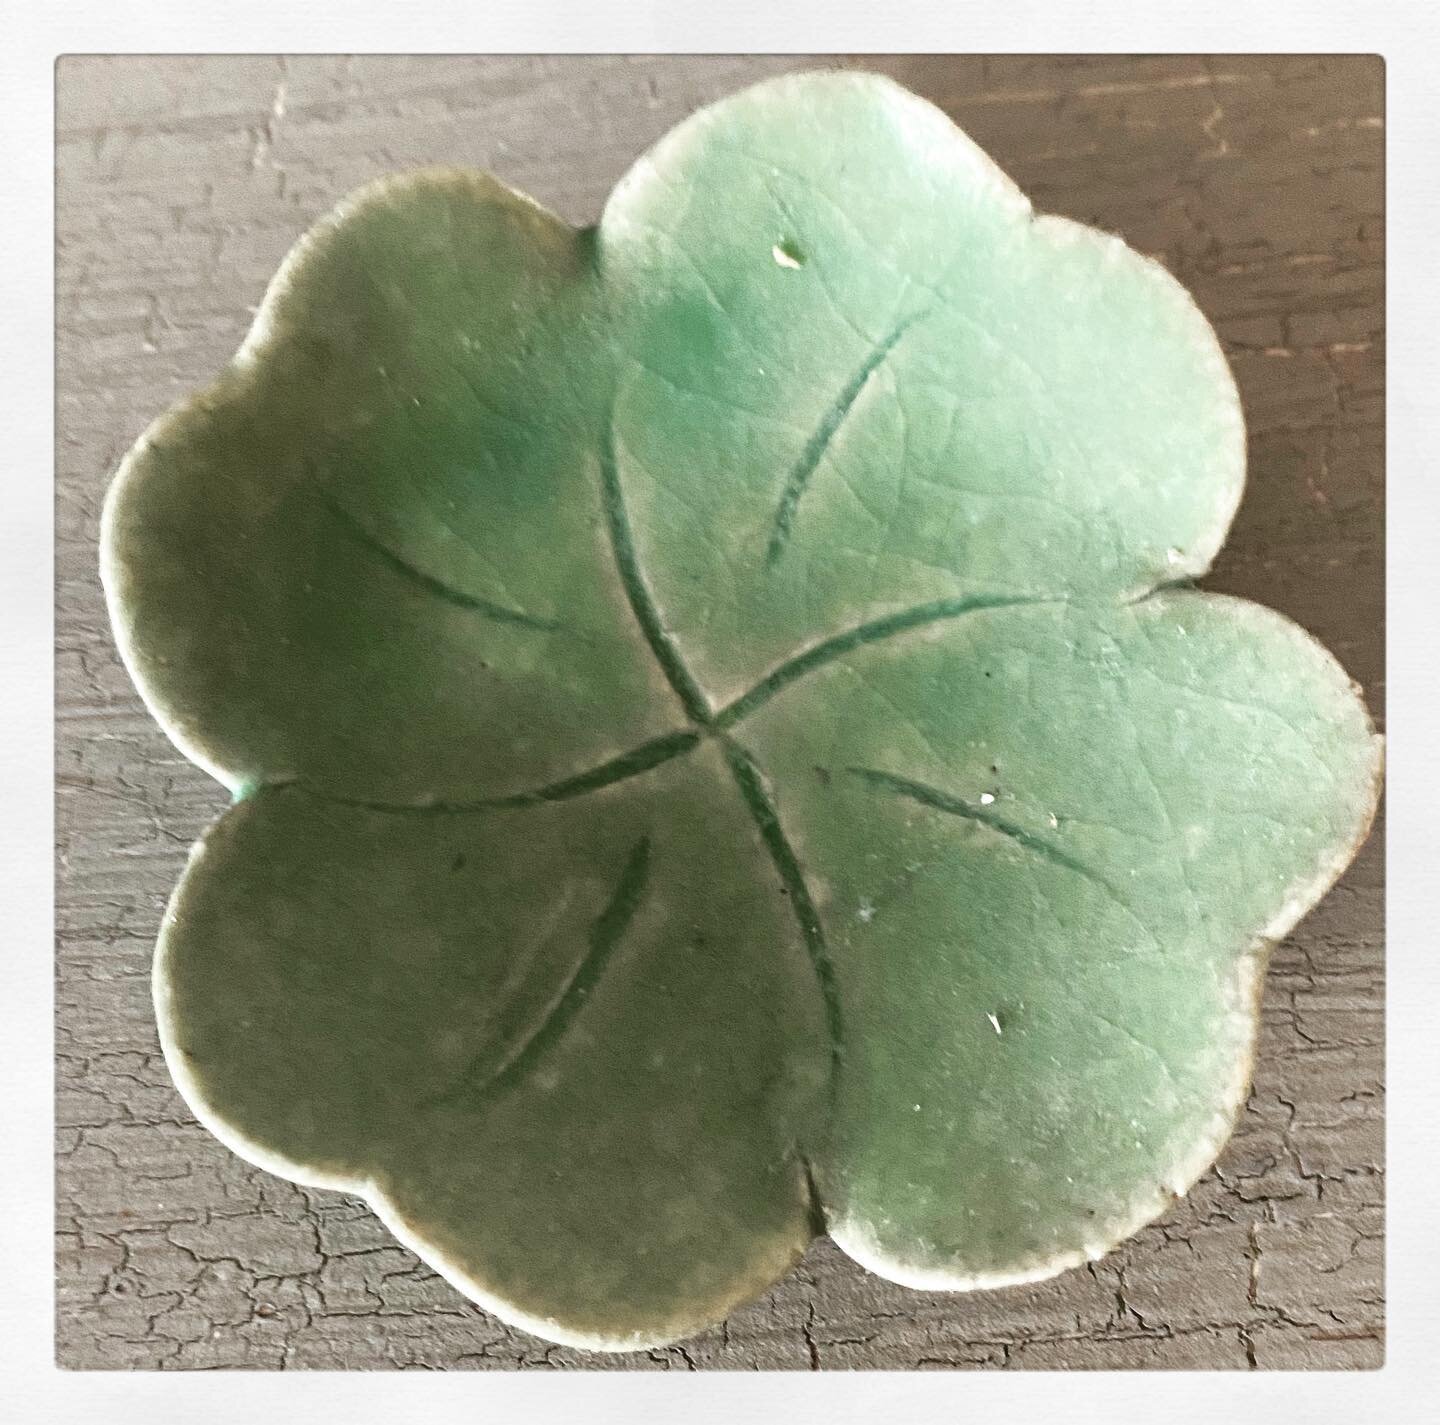 I have a thing for fourleafed clover,this delightful porcelain one was bought in Kyoto and measures just 4cms across.
I don&rsquo;t know the maker but isn&rsquo;t it beautiful?
.
.
.
#fourleafedclover #japaneseceramics#celandon#smallisbeautiful#ceram